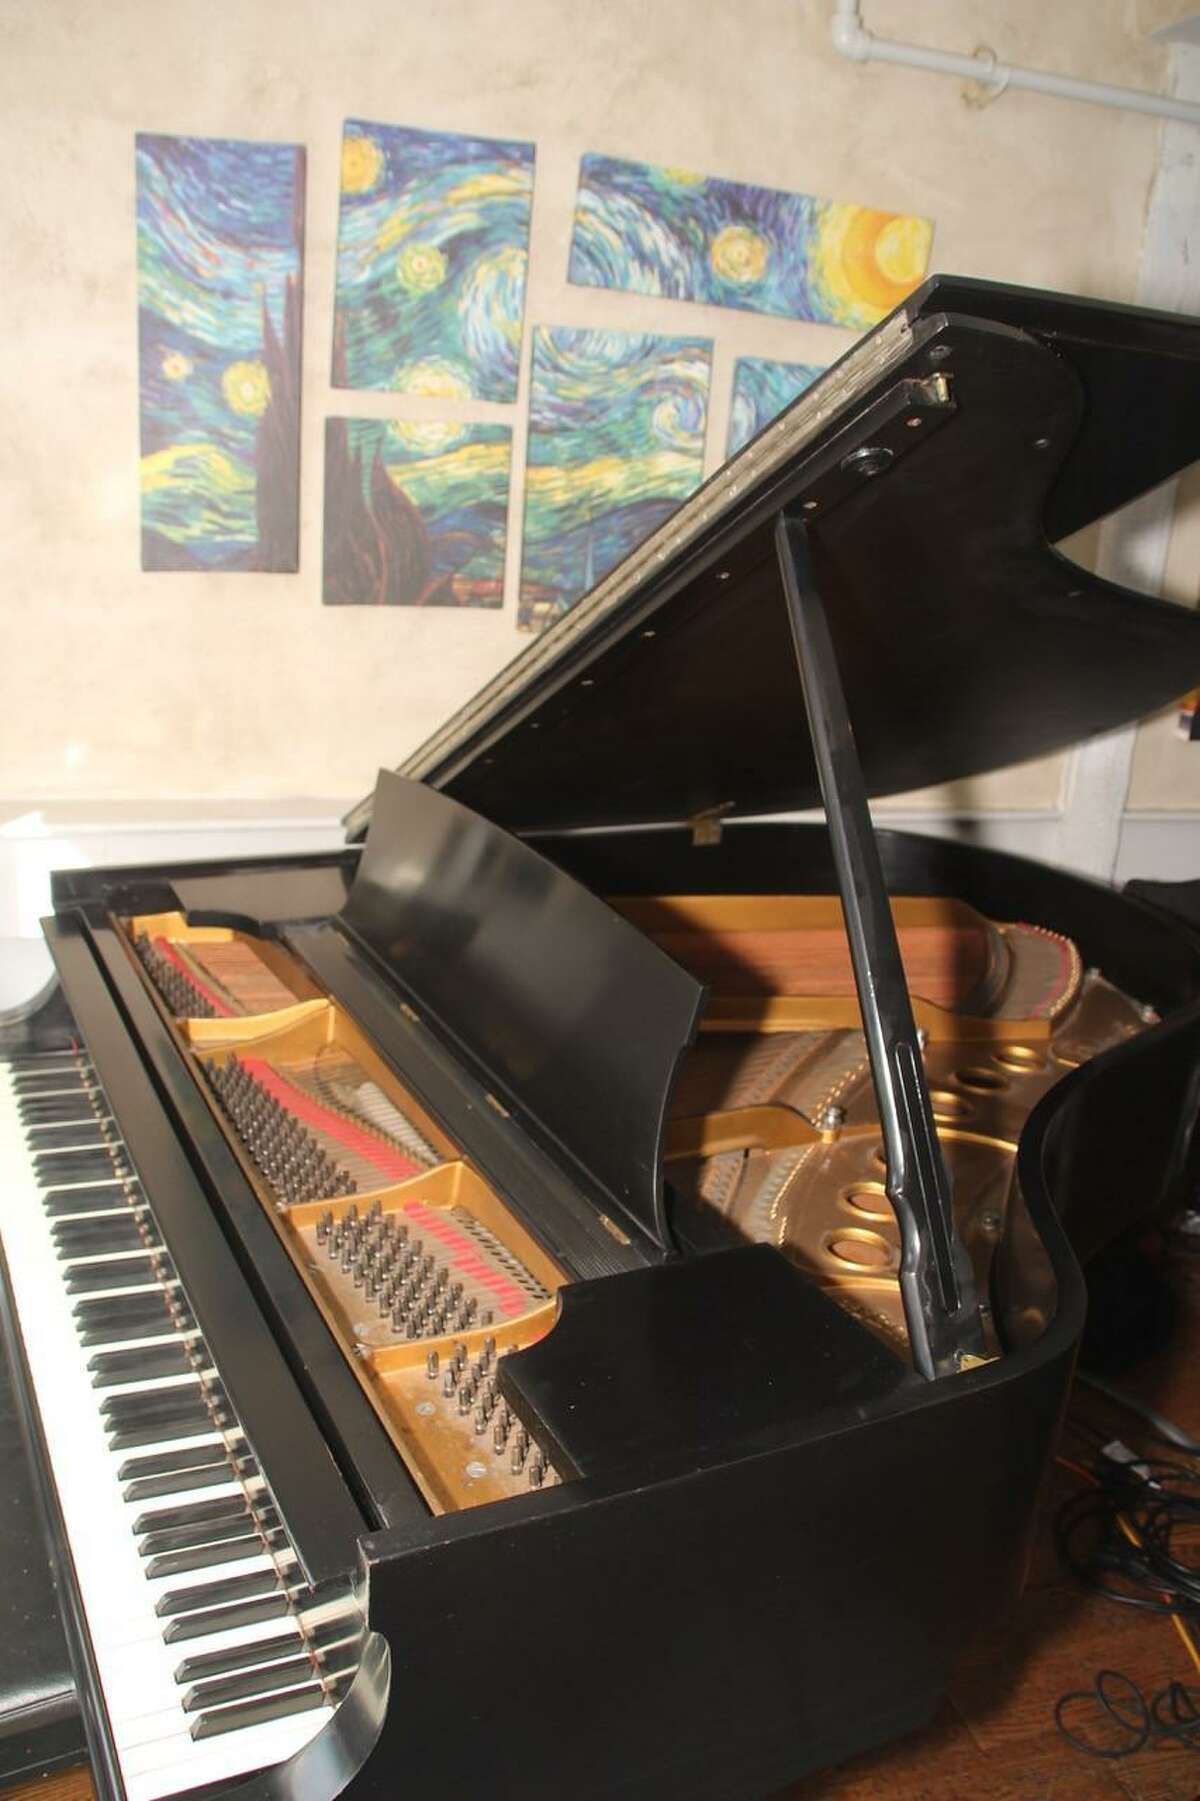 This 1937 Steinway model M was at the Village Gate in New York City until the club closed in 1988. Now the piano is at the Pearl restaurant in Westport, and is owned by the Jazz Society of Fairfield County.